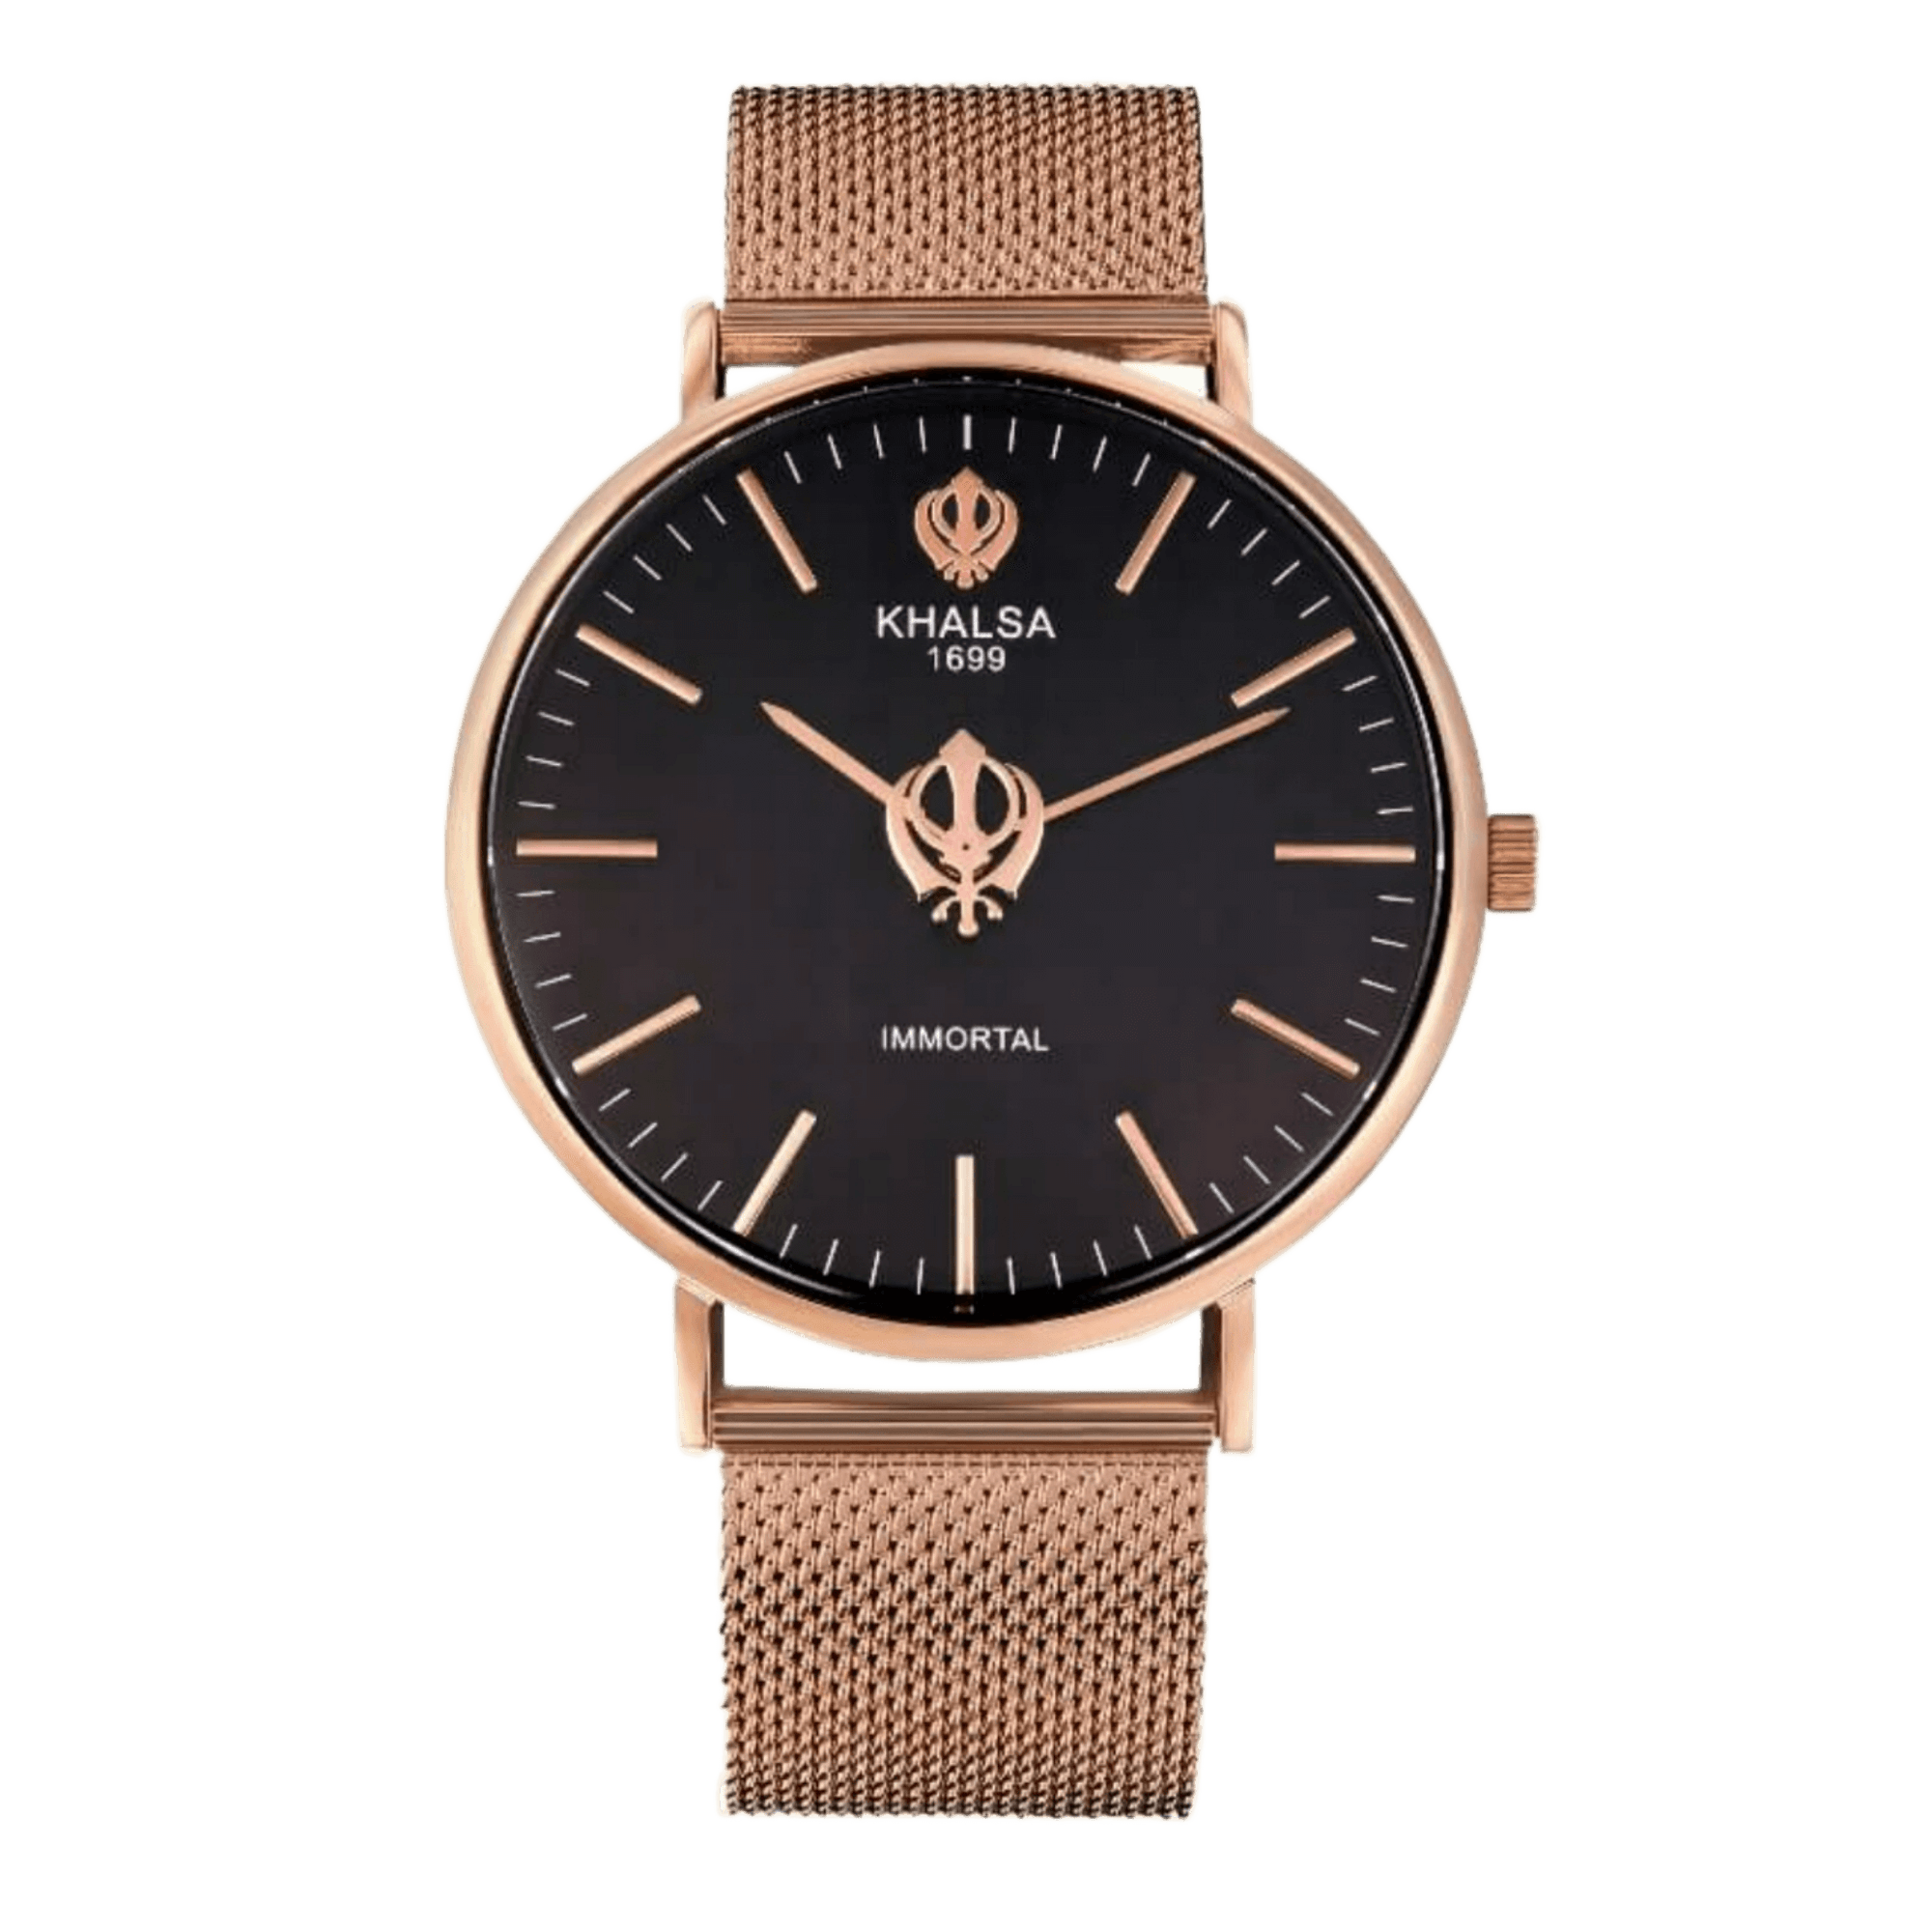 House of Khalsa IMMORTAL Gold Black Sikh watch with Khanda symbol, sun dial and Stainless Steel Gold Plated Strap - Elegant and Stylish